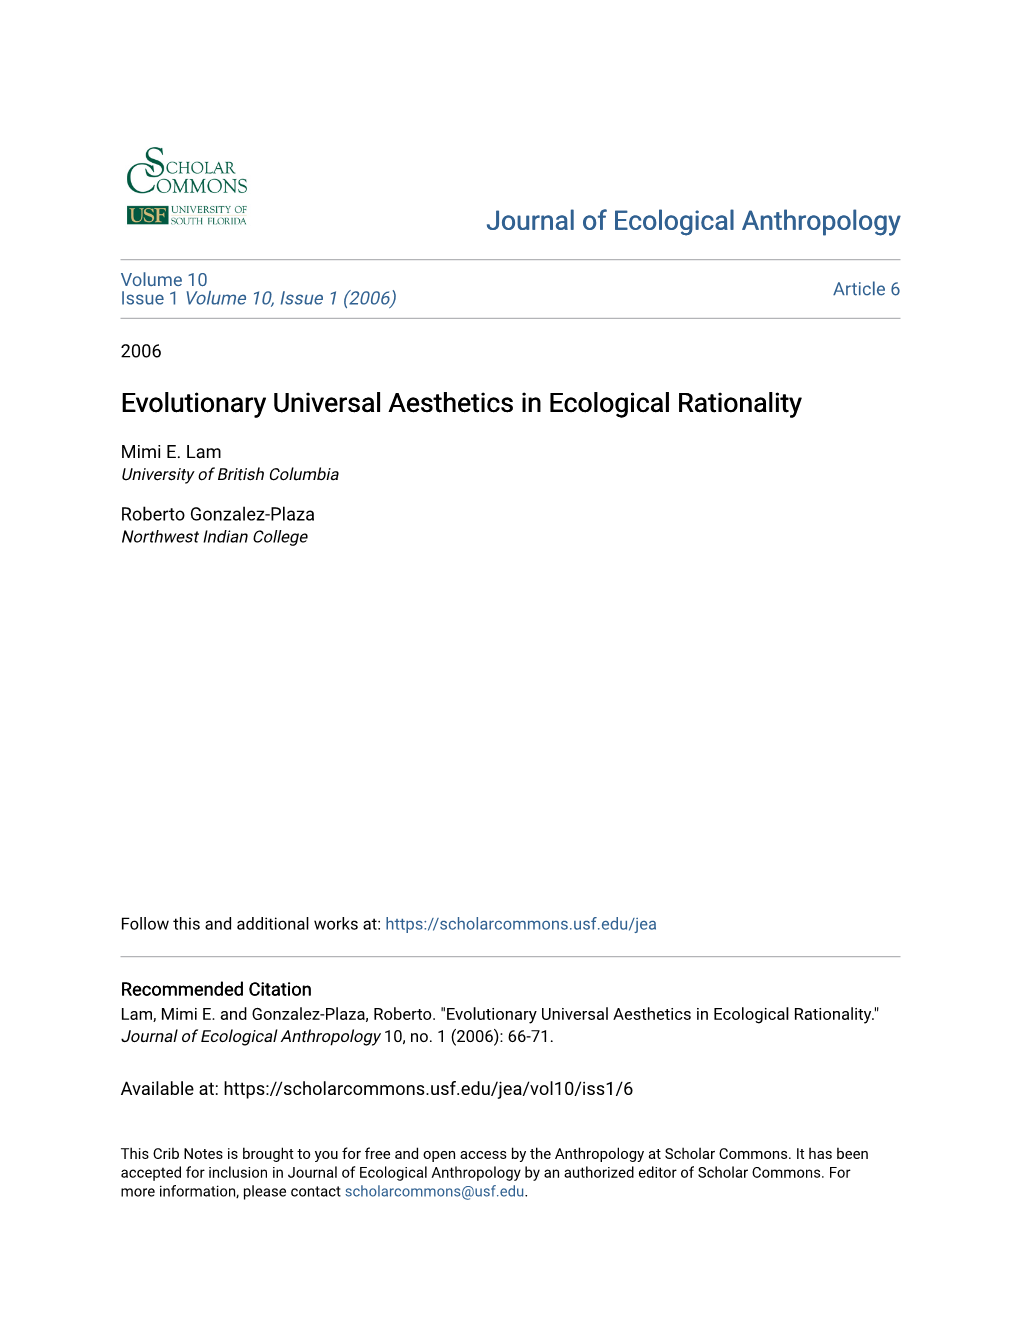 Evolutionary Universal Aesthetics in Ecological Rationality